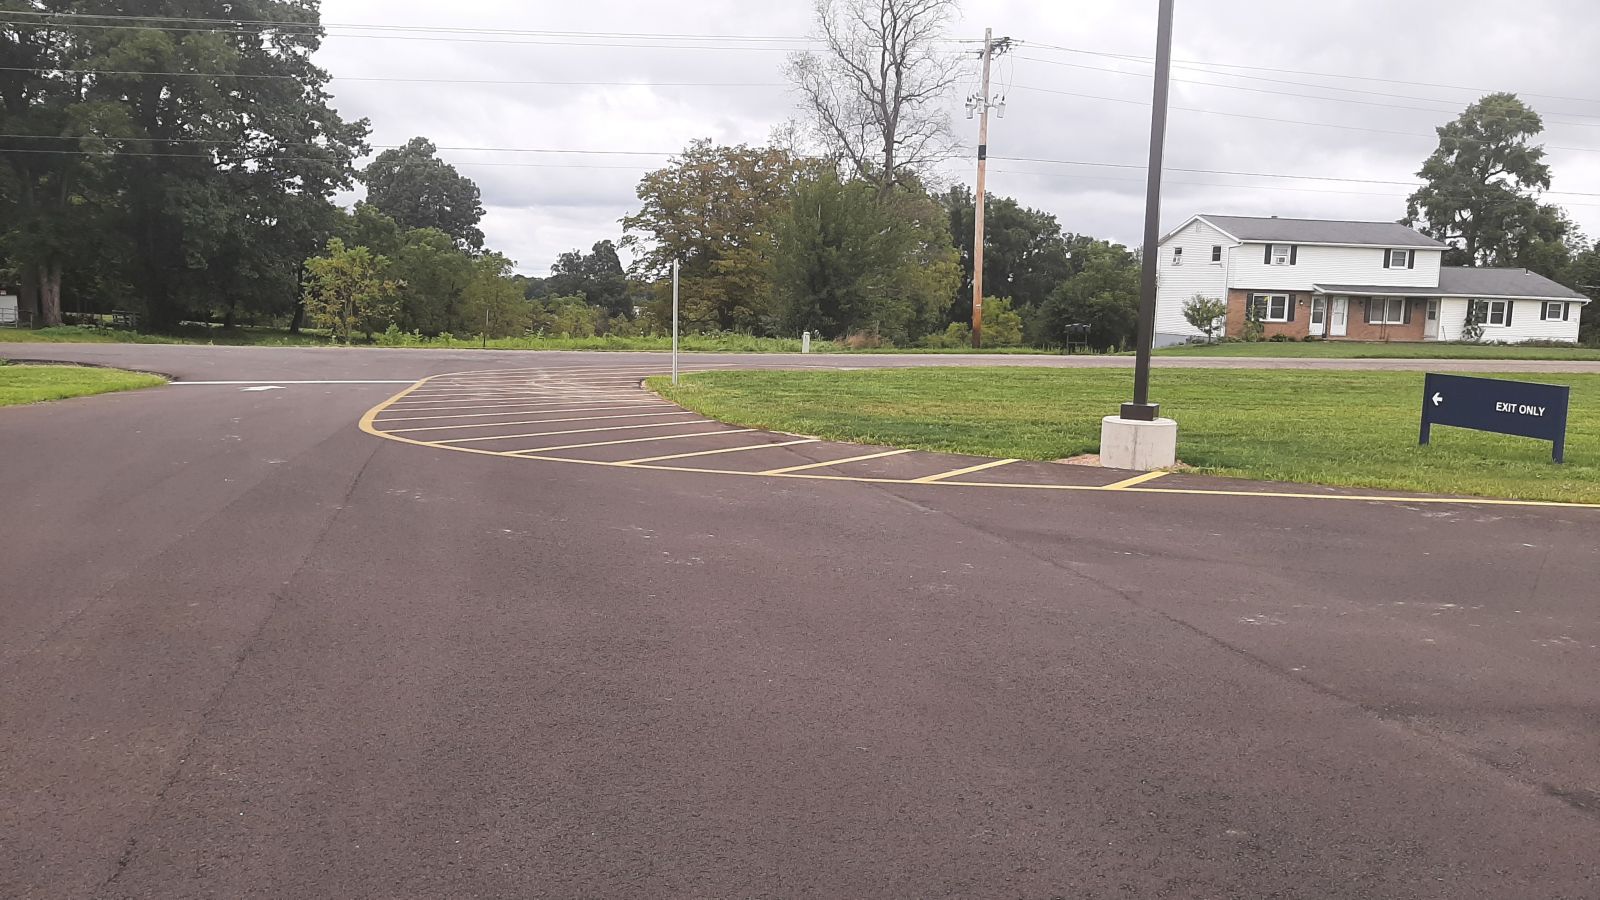 An image of the parking lot, an exit only sign, and painted lines on the blacktop.   